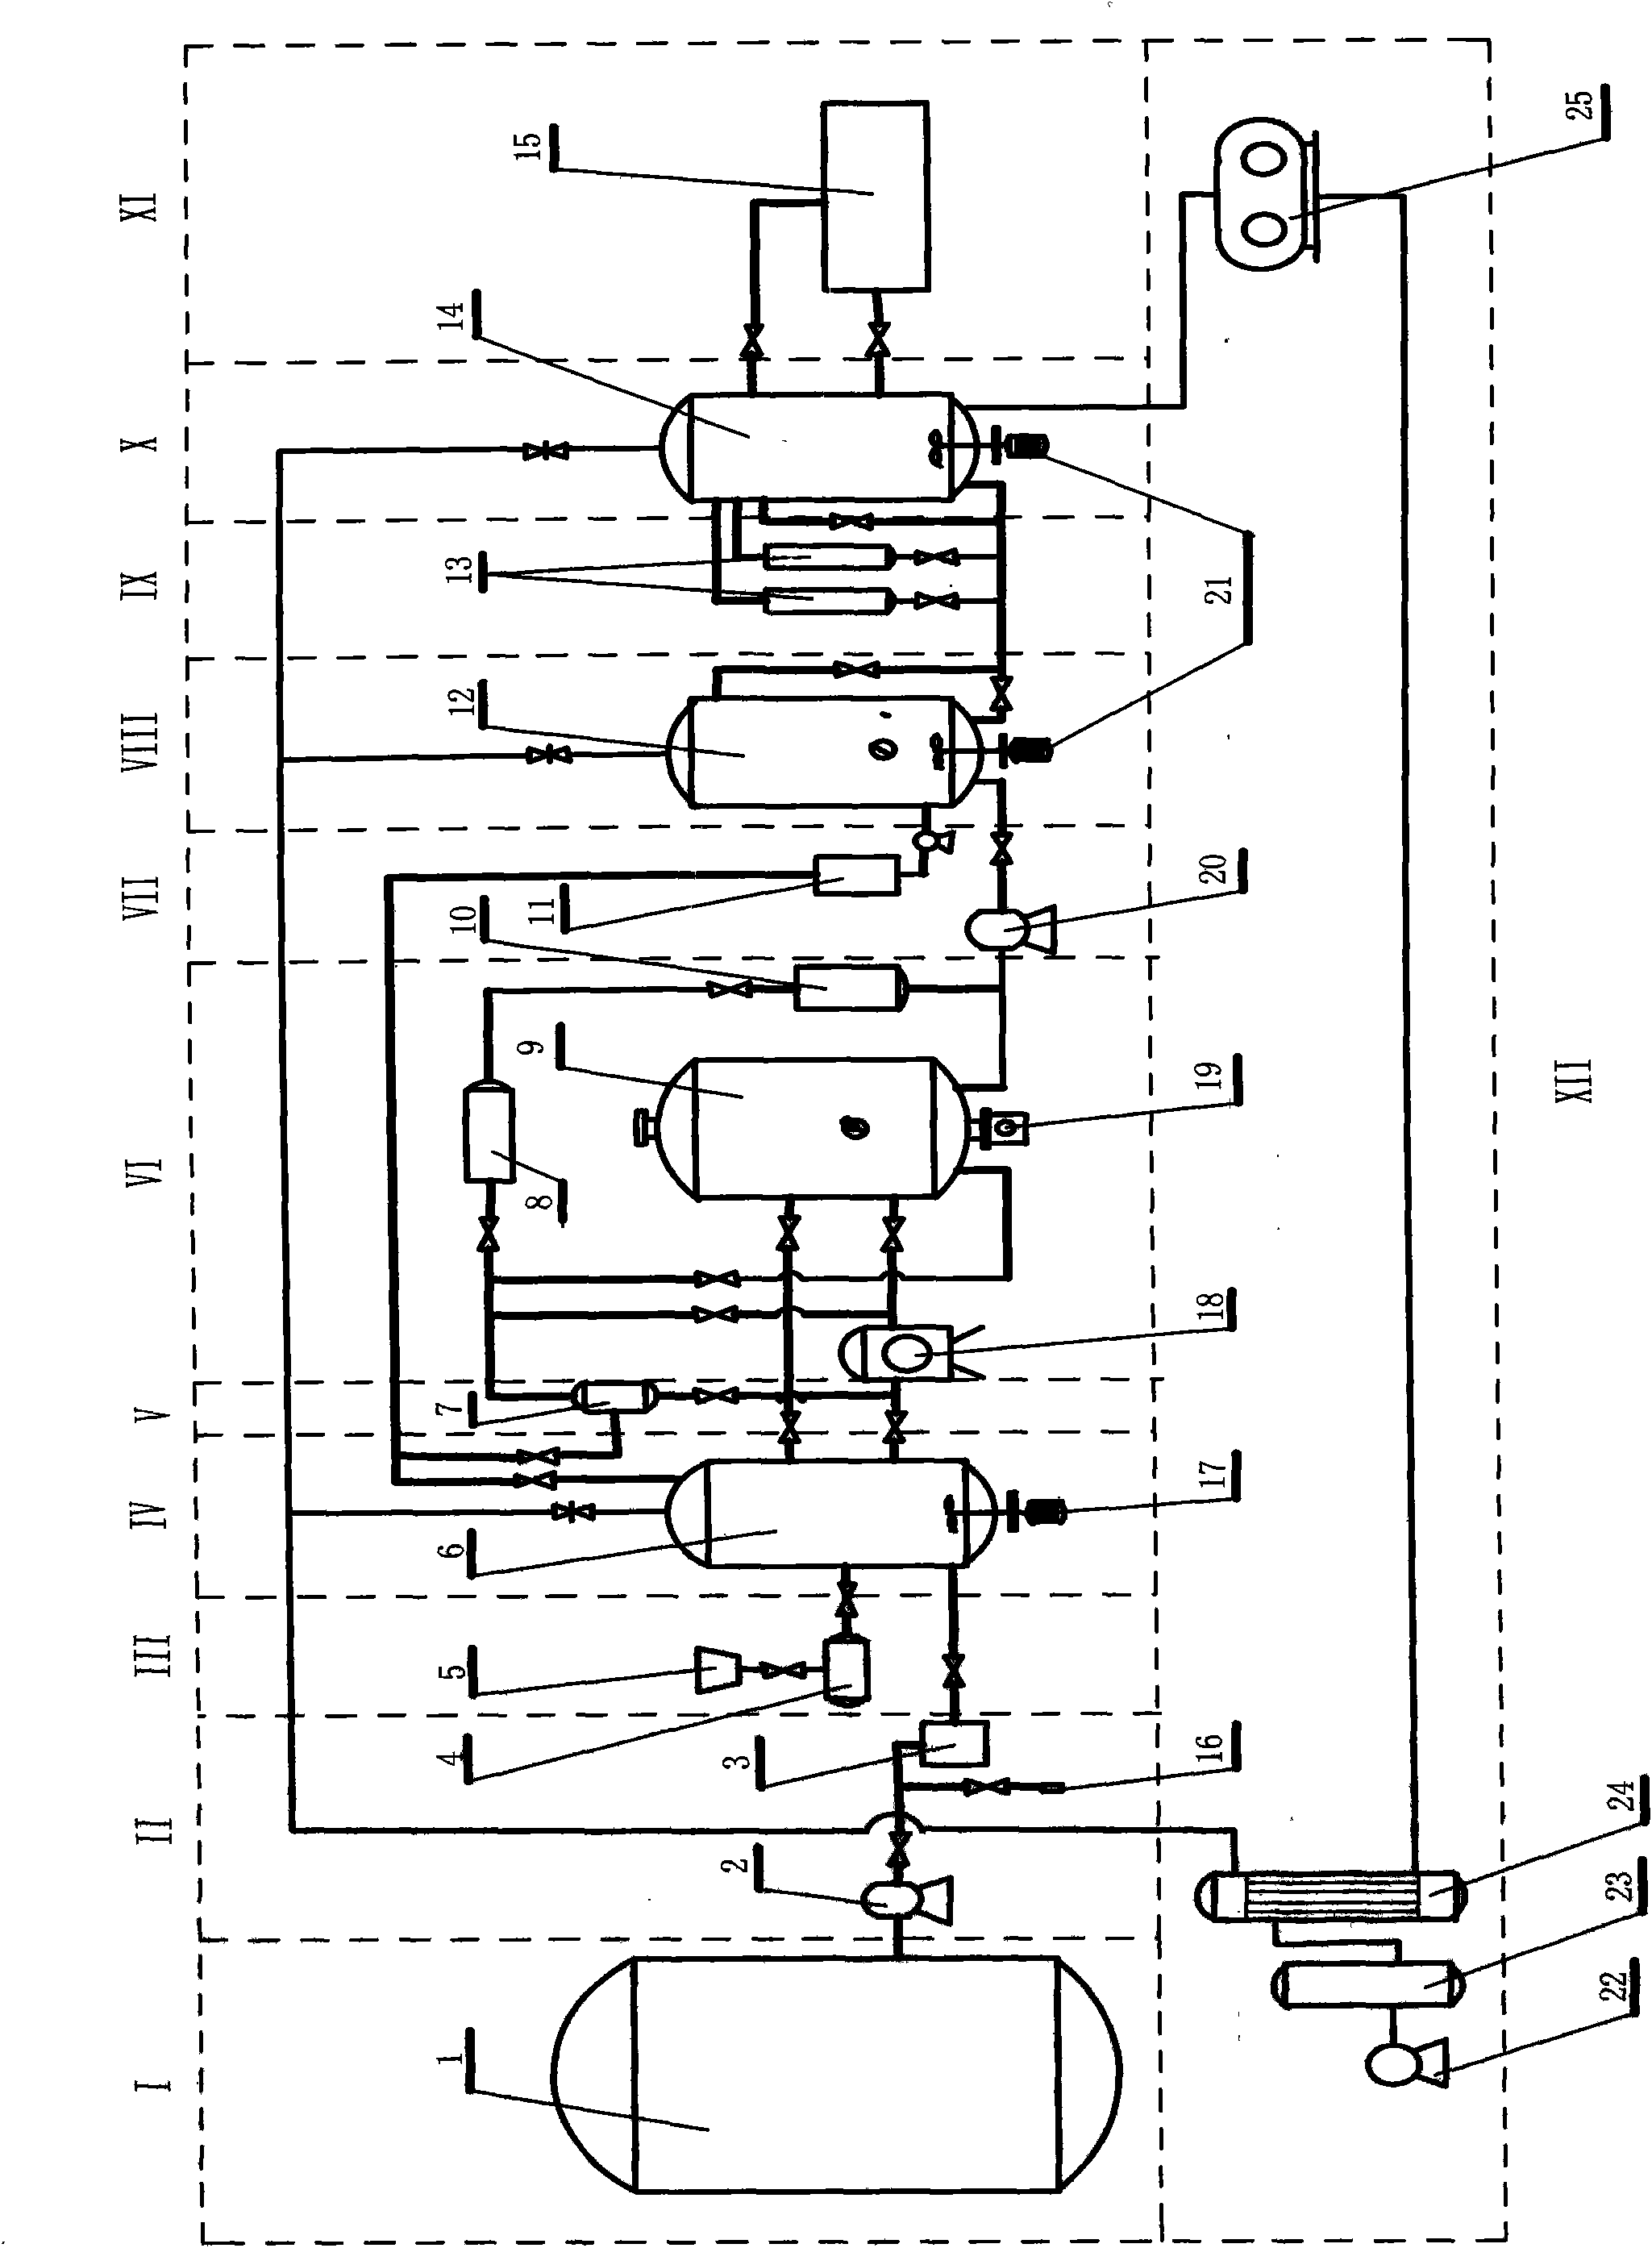 Solid-liquid phase composite internal combustion engine oil